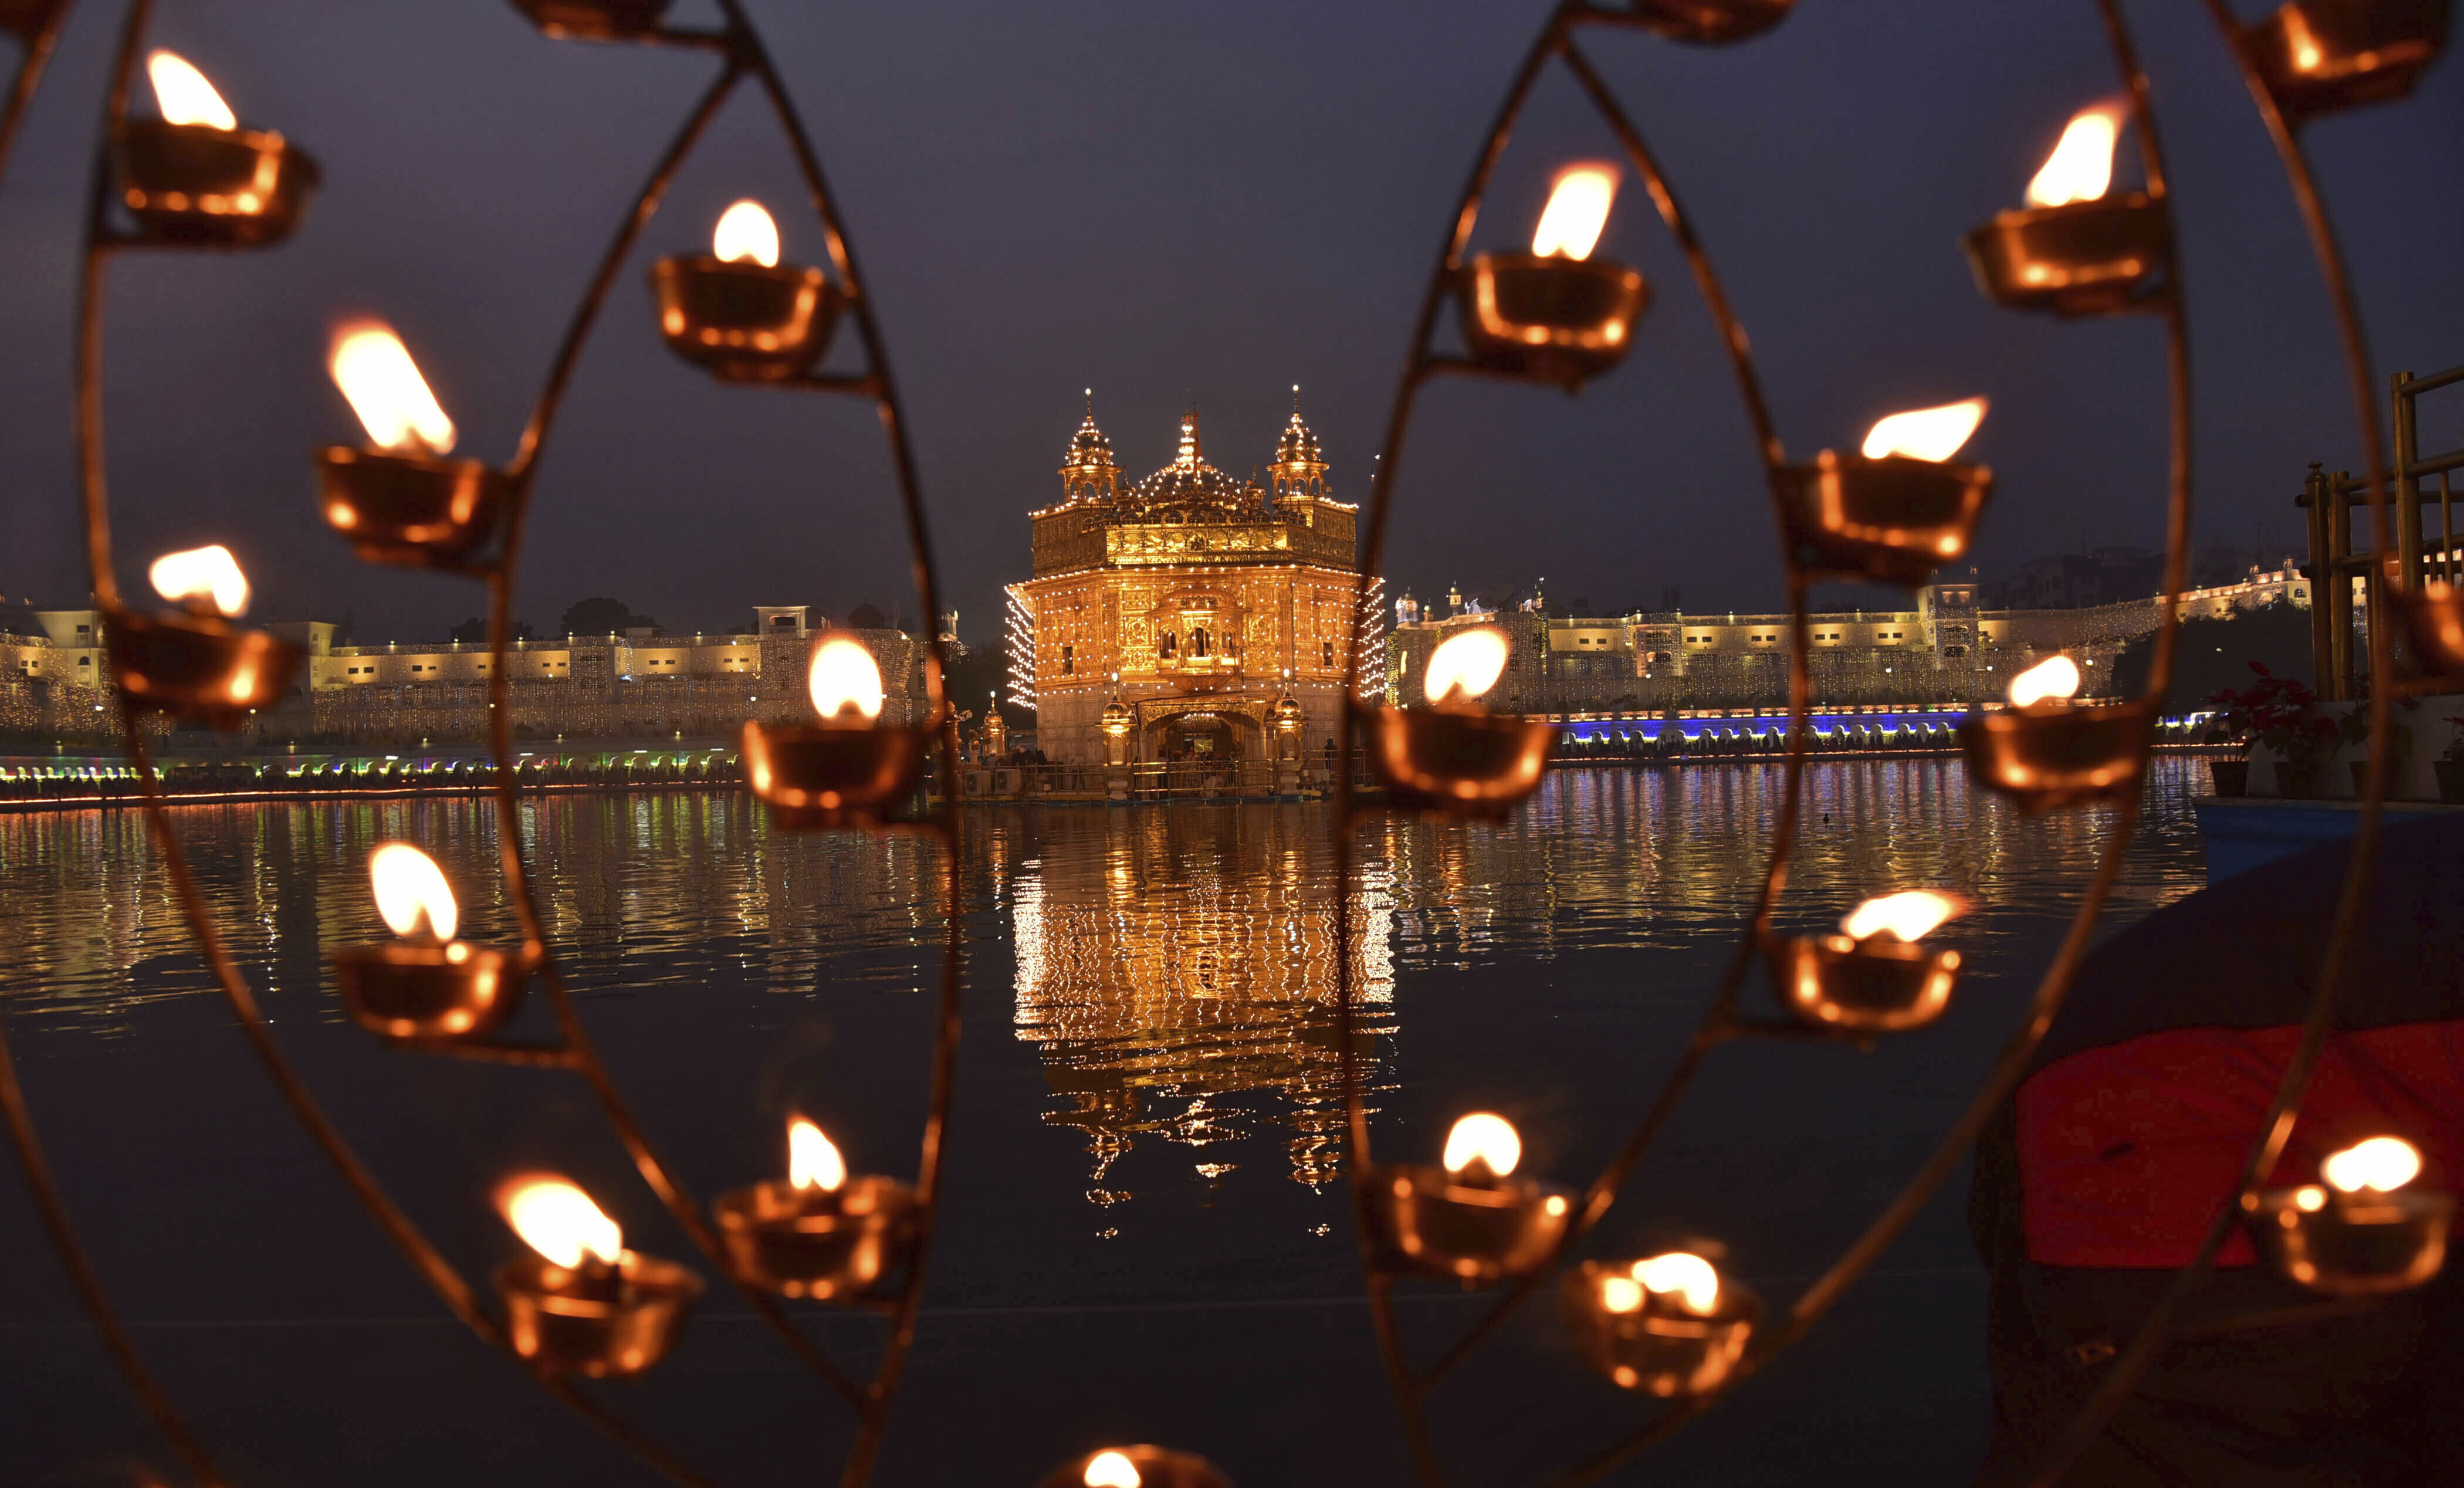 Lamps lit by devotees shine in front of the illuminated Golden Temple, the holiest of Sikh shrines, on the birth anniversary of Guru Nanak in Amritsar, India, Tuesday, Nov. 12, 2019. Sikhs across the world are marking the birth anniversary of Guru Nanak, the founder of Sikhism and first guru. (AP Photo/Prabhjot Gill)